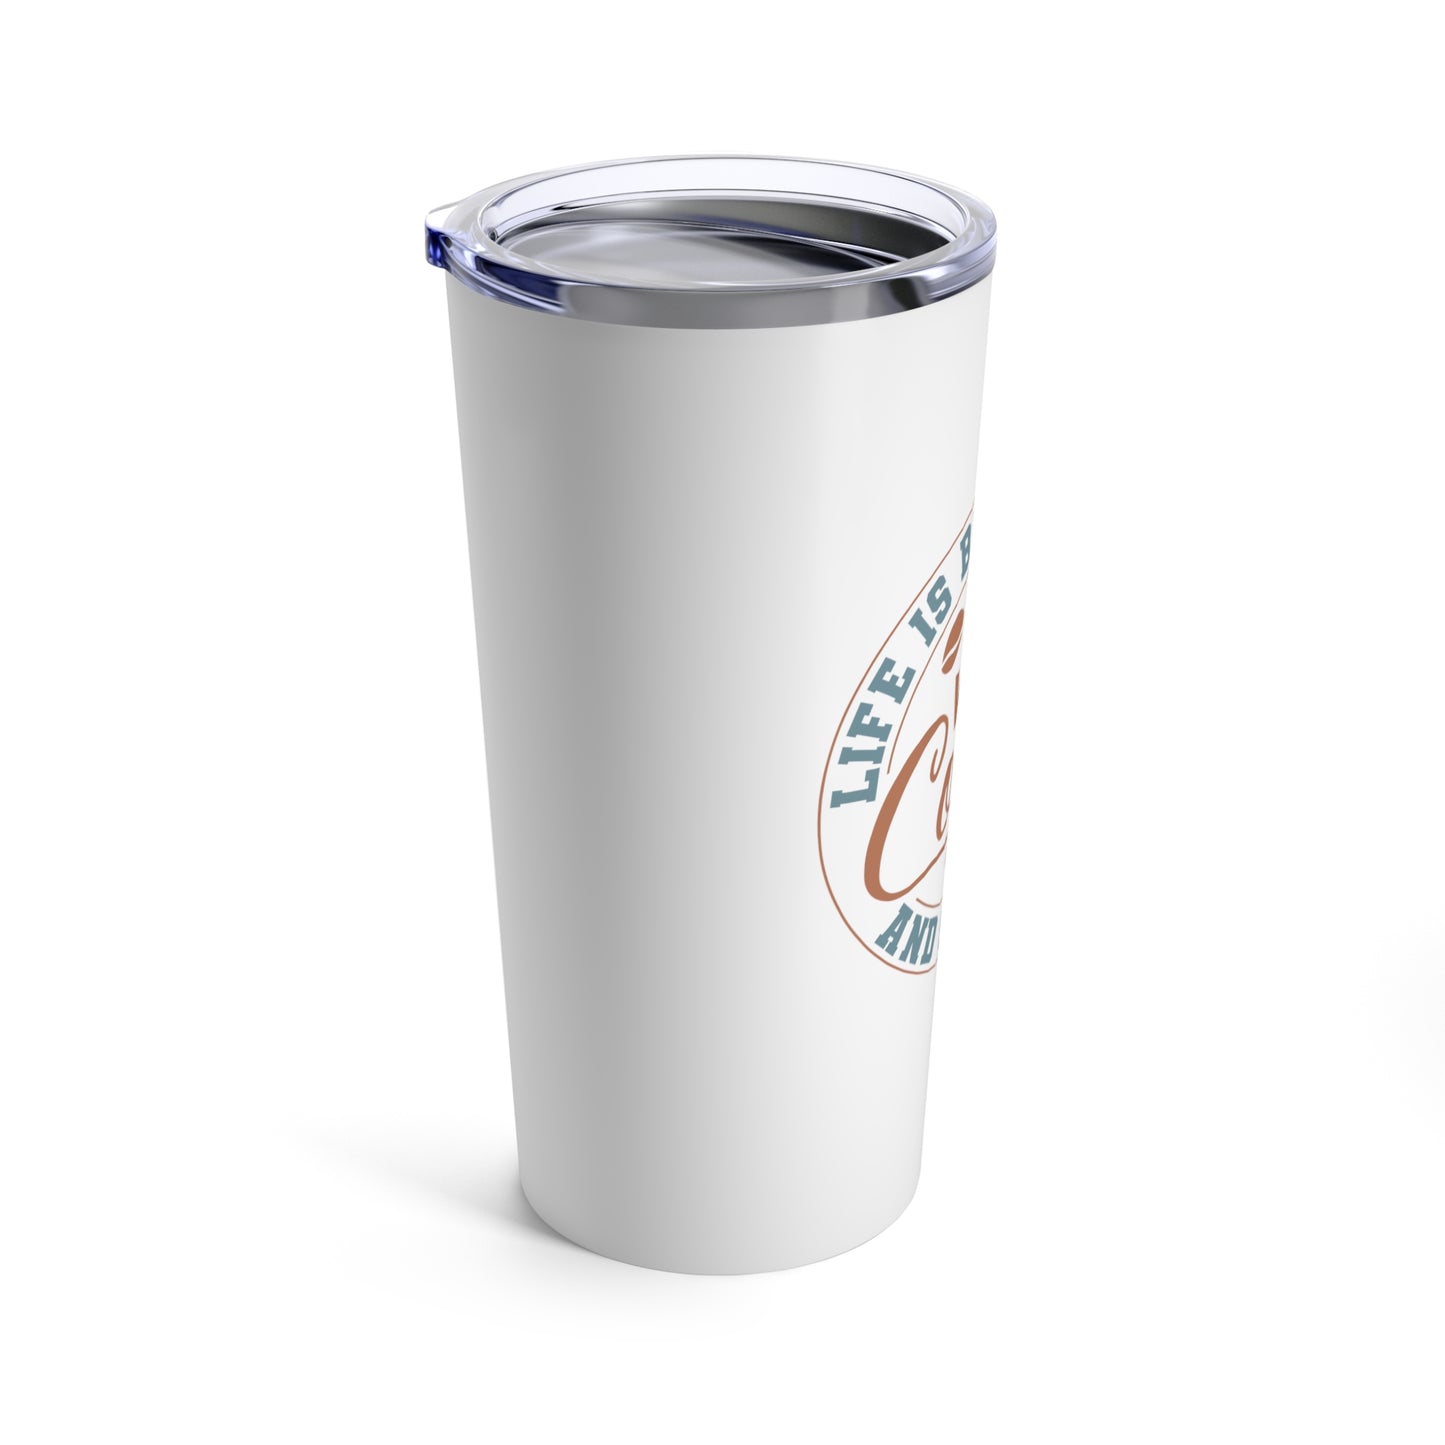 Life is Brew-tiful with Coffee and Scones 20 oz Tumbler